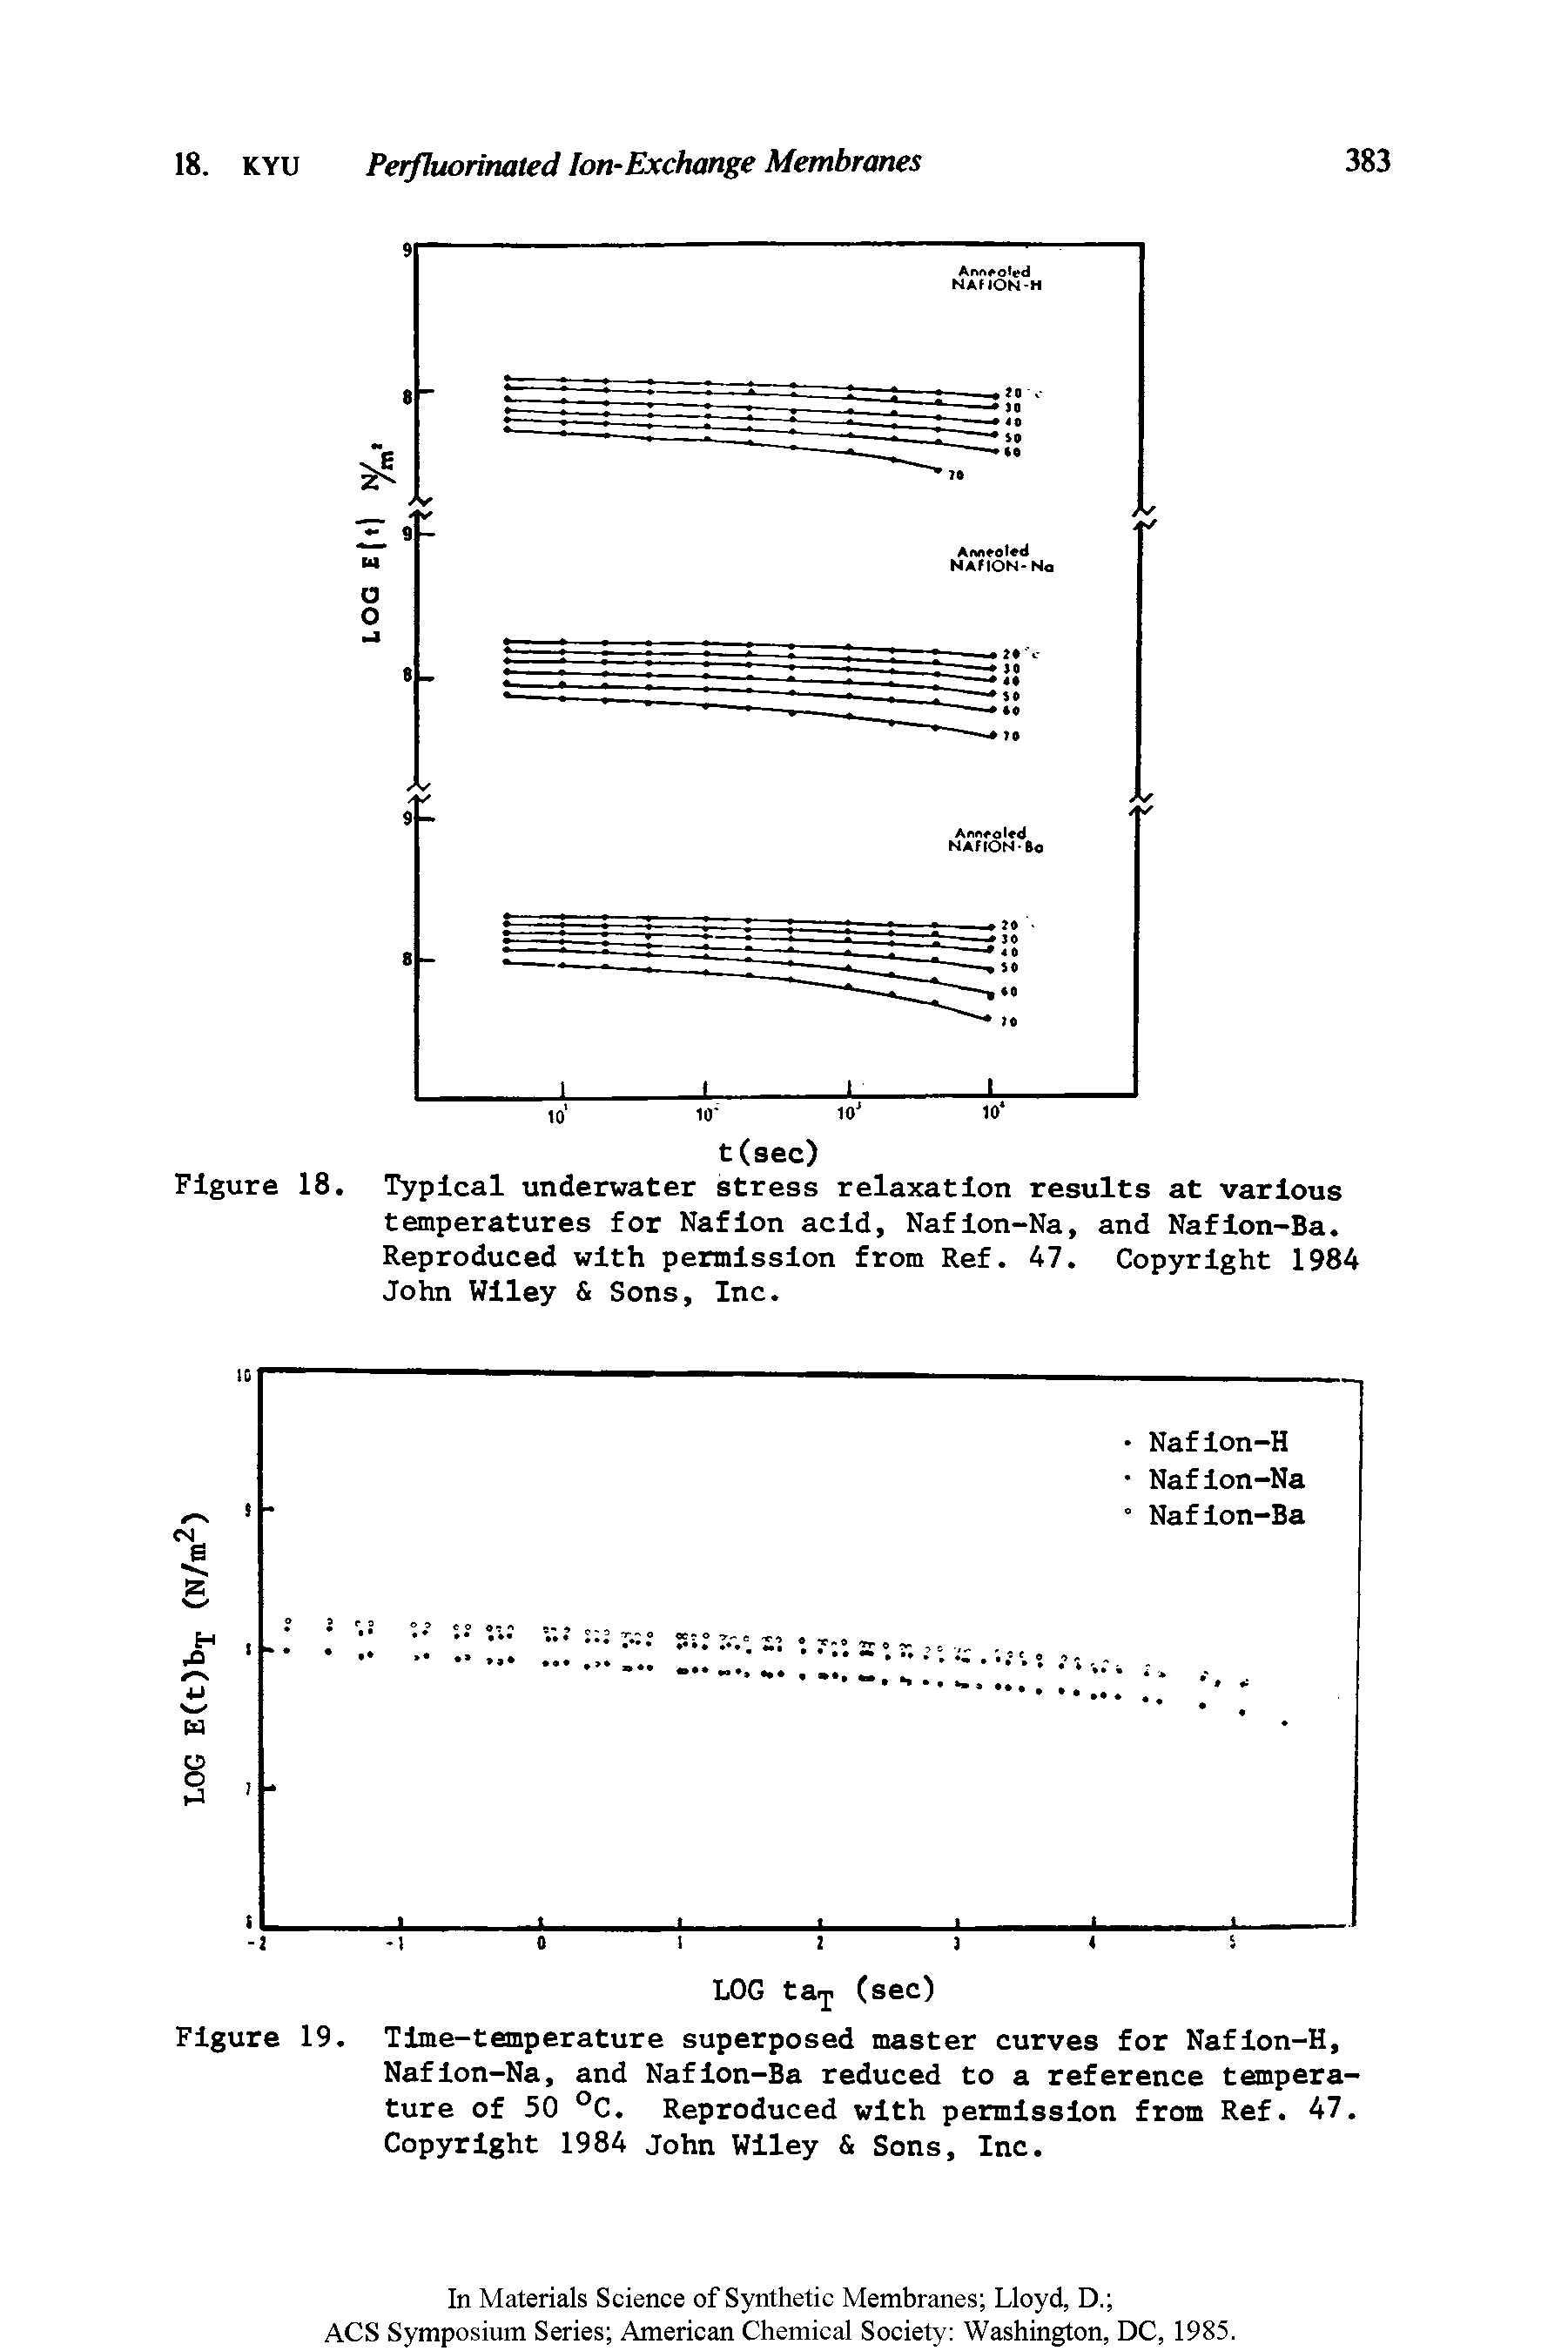 Figure 19, Time-temperature superposed master curves for Naflon-H, Naflon-Na, and Naflon-Ba reduced to a reference temperature of 50 °C. Reproduced with permission from Ref. 47. Copyright 1984 John Wiley Sons, Inc.